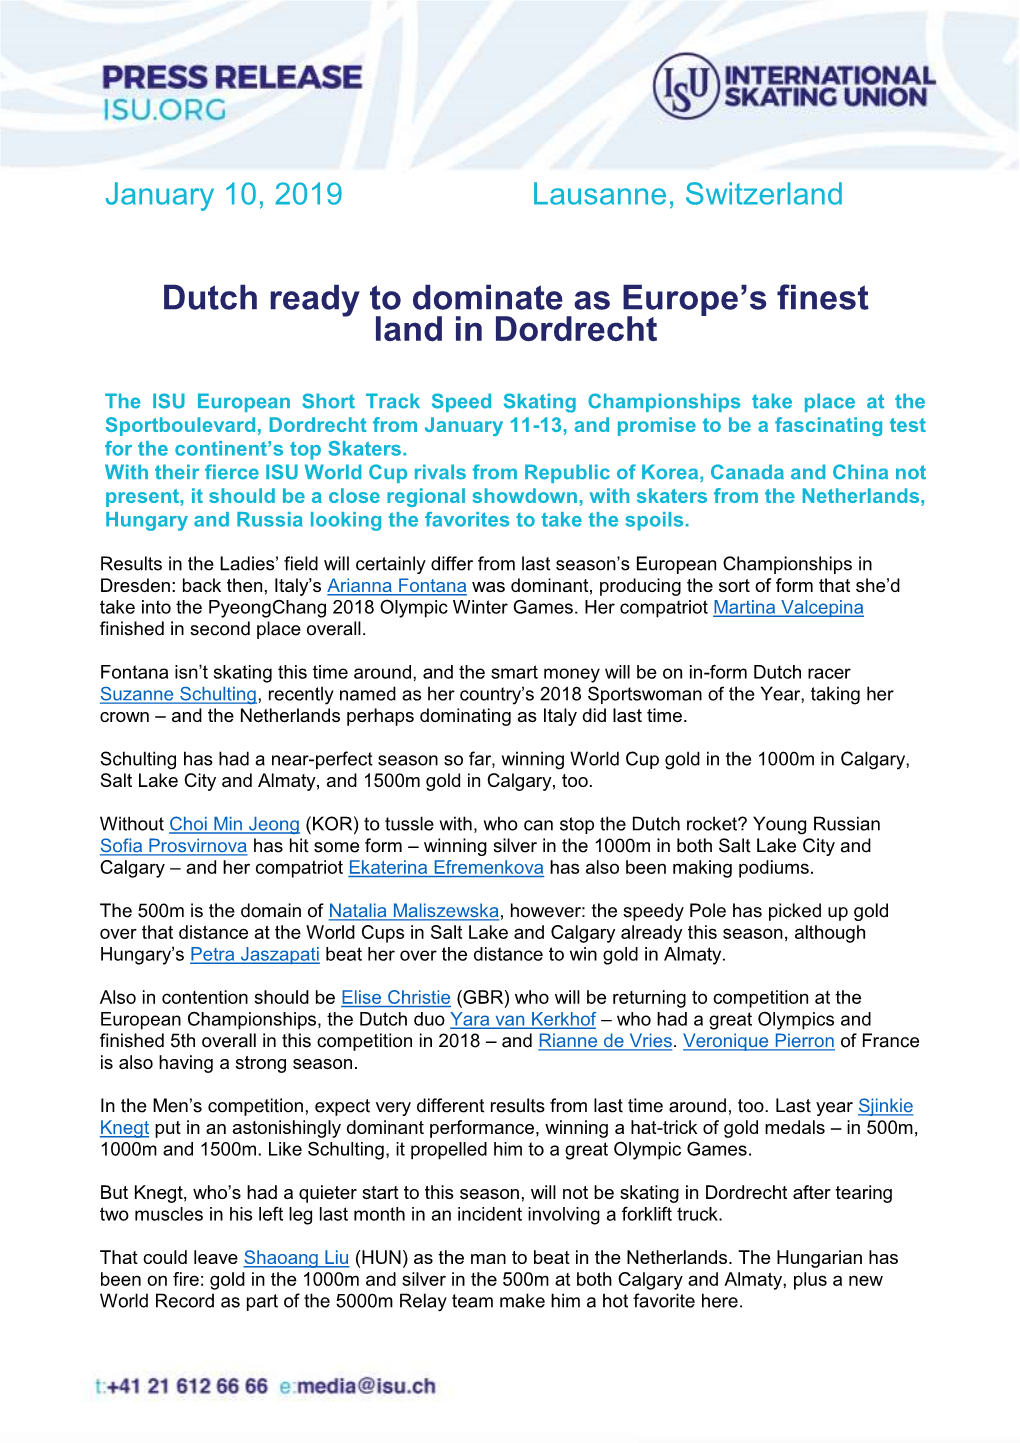 Dutch Ready to Dominate As Europe's Finest Land in Dordrecht